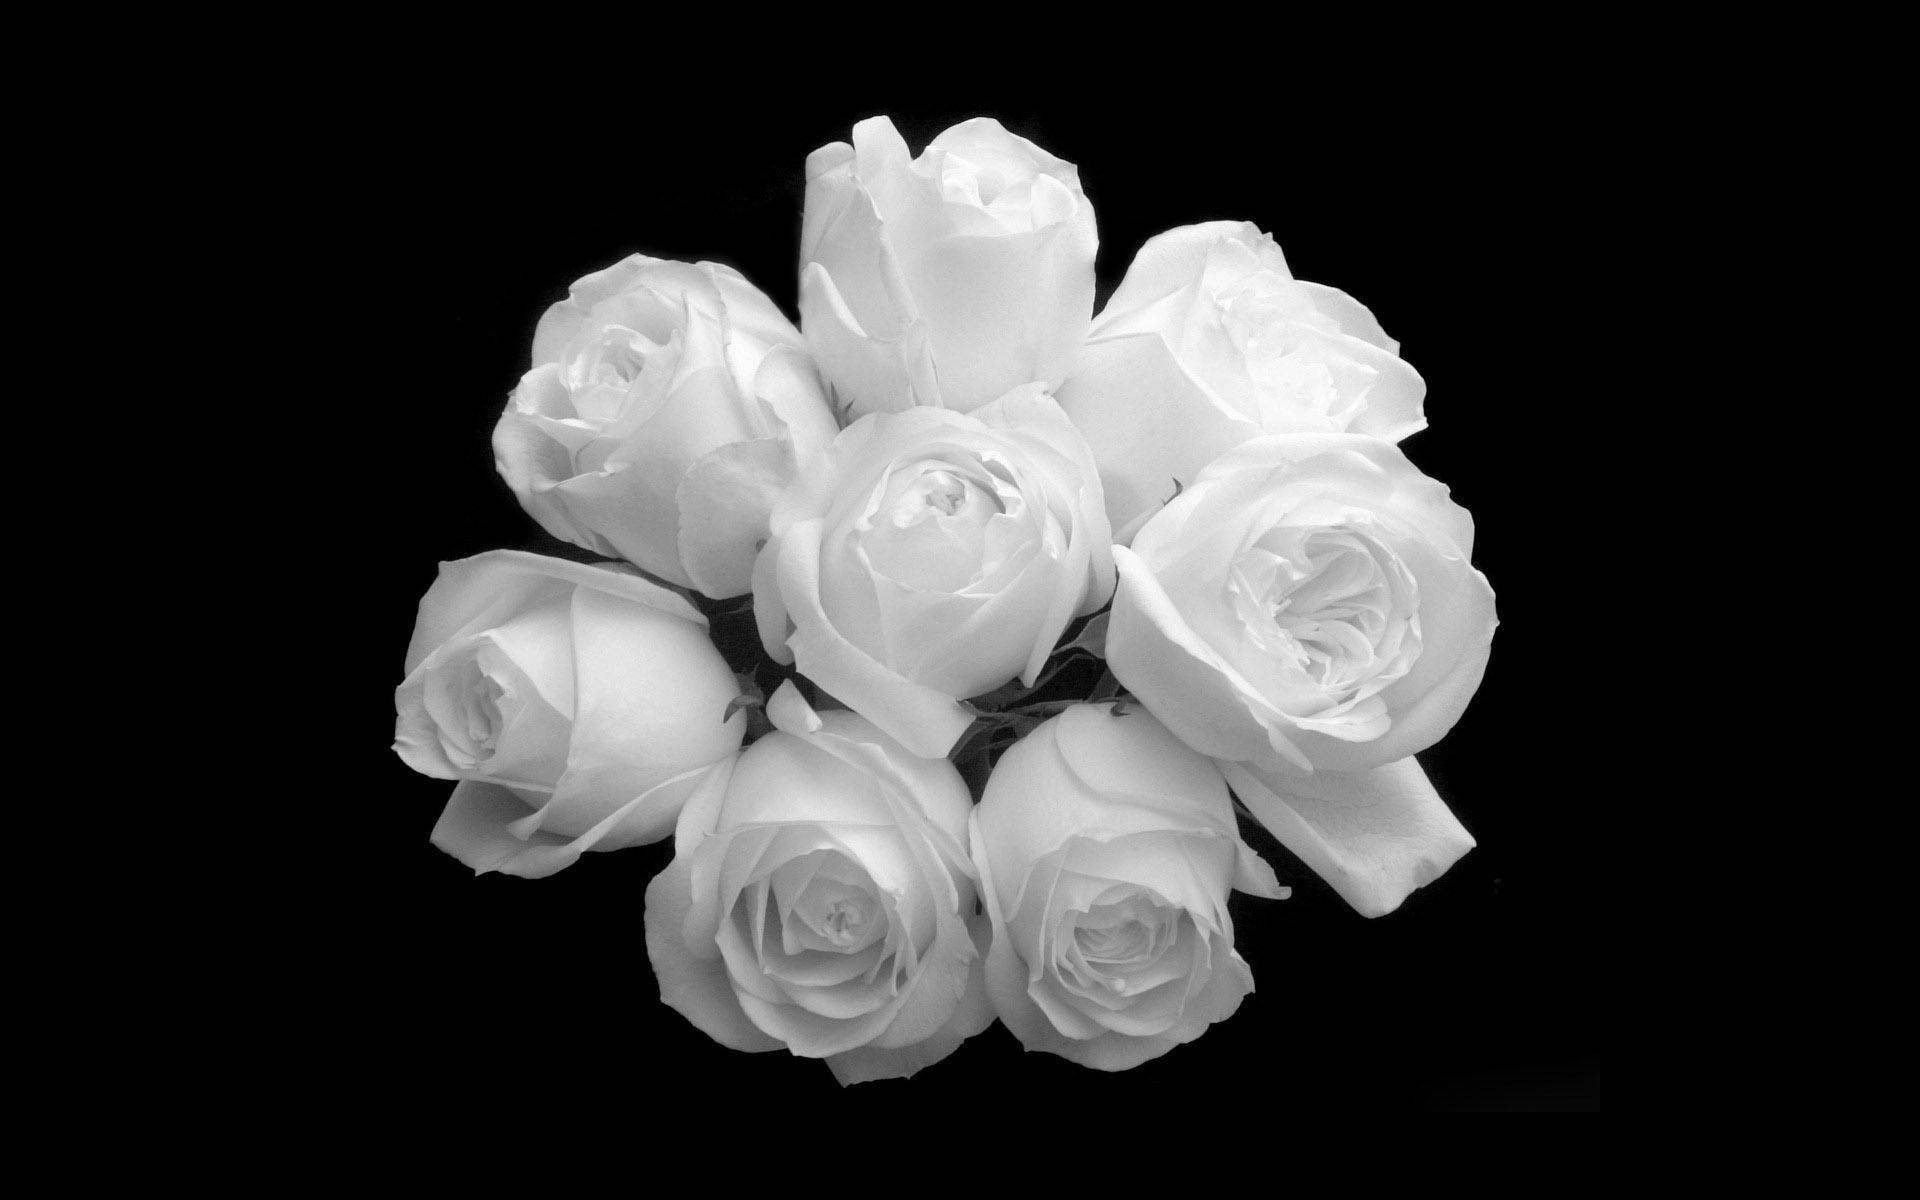 Bunch Of Black And White Rose Flowers Wallpaper